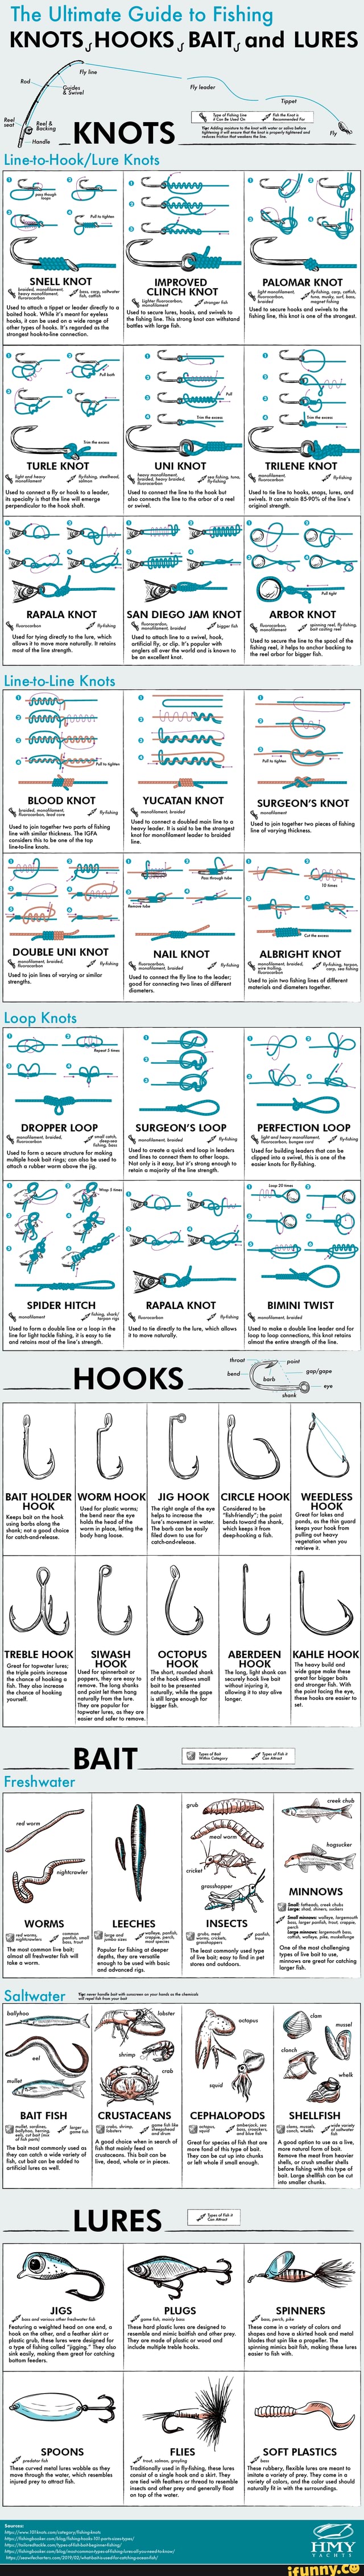 Palomar Knot Tying Instructions and Strength Charts